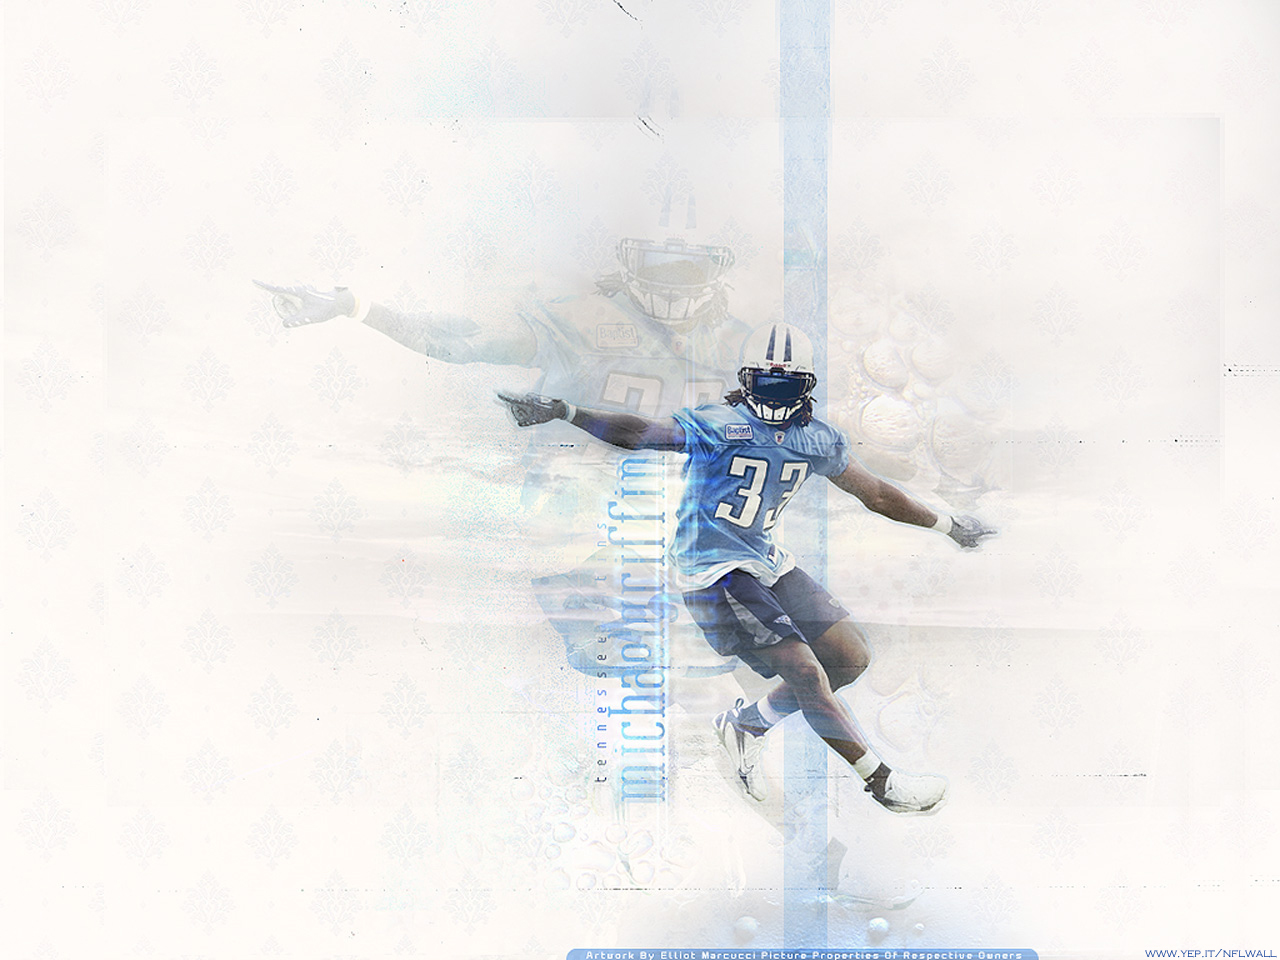 Tennessee Titans iPhone Wallpaper High Definition